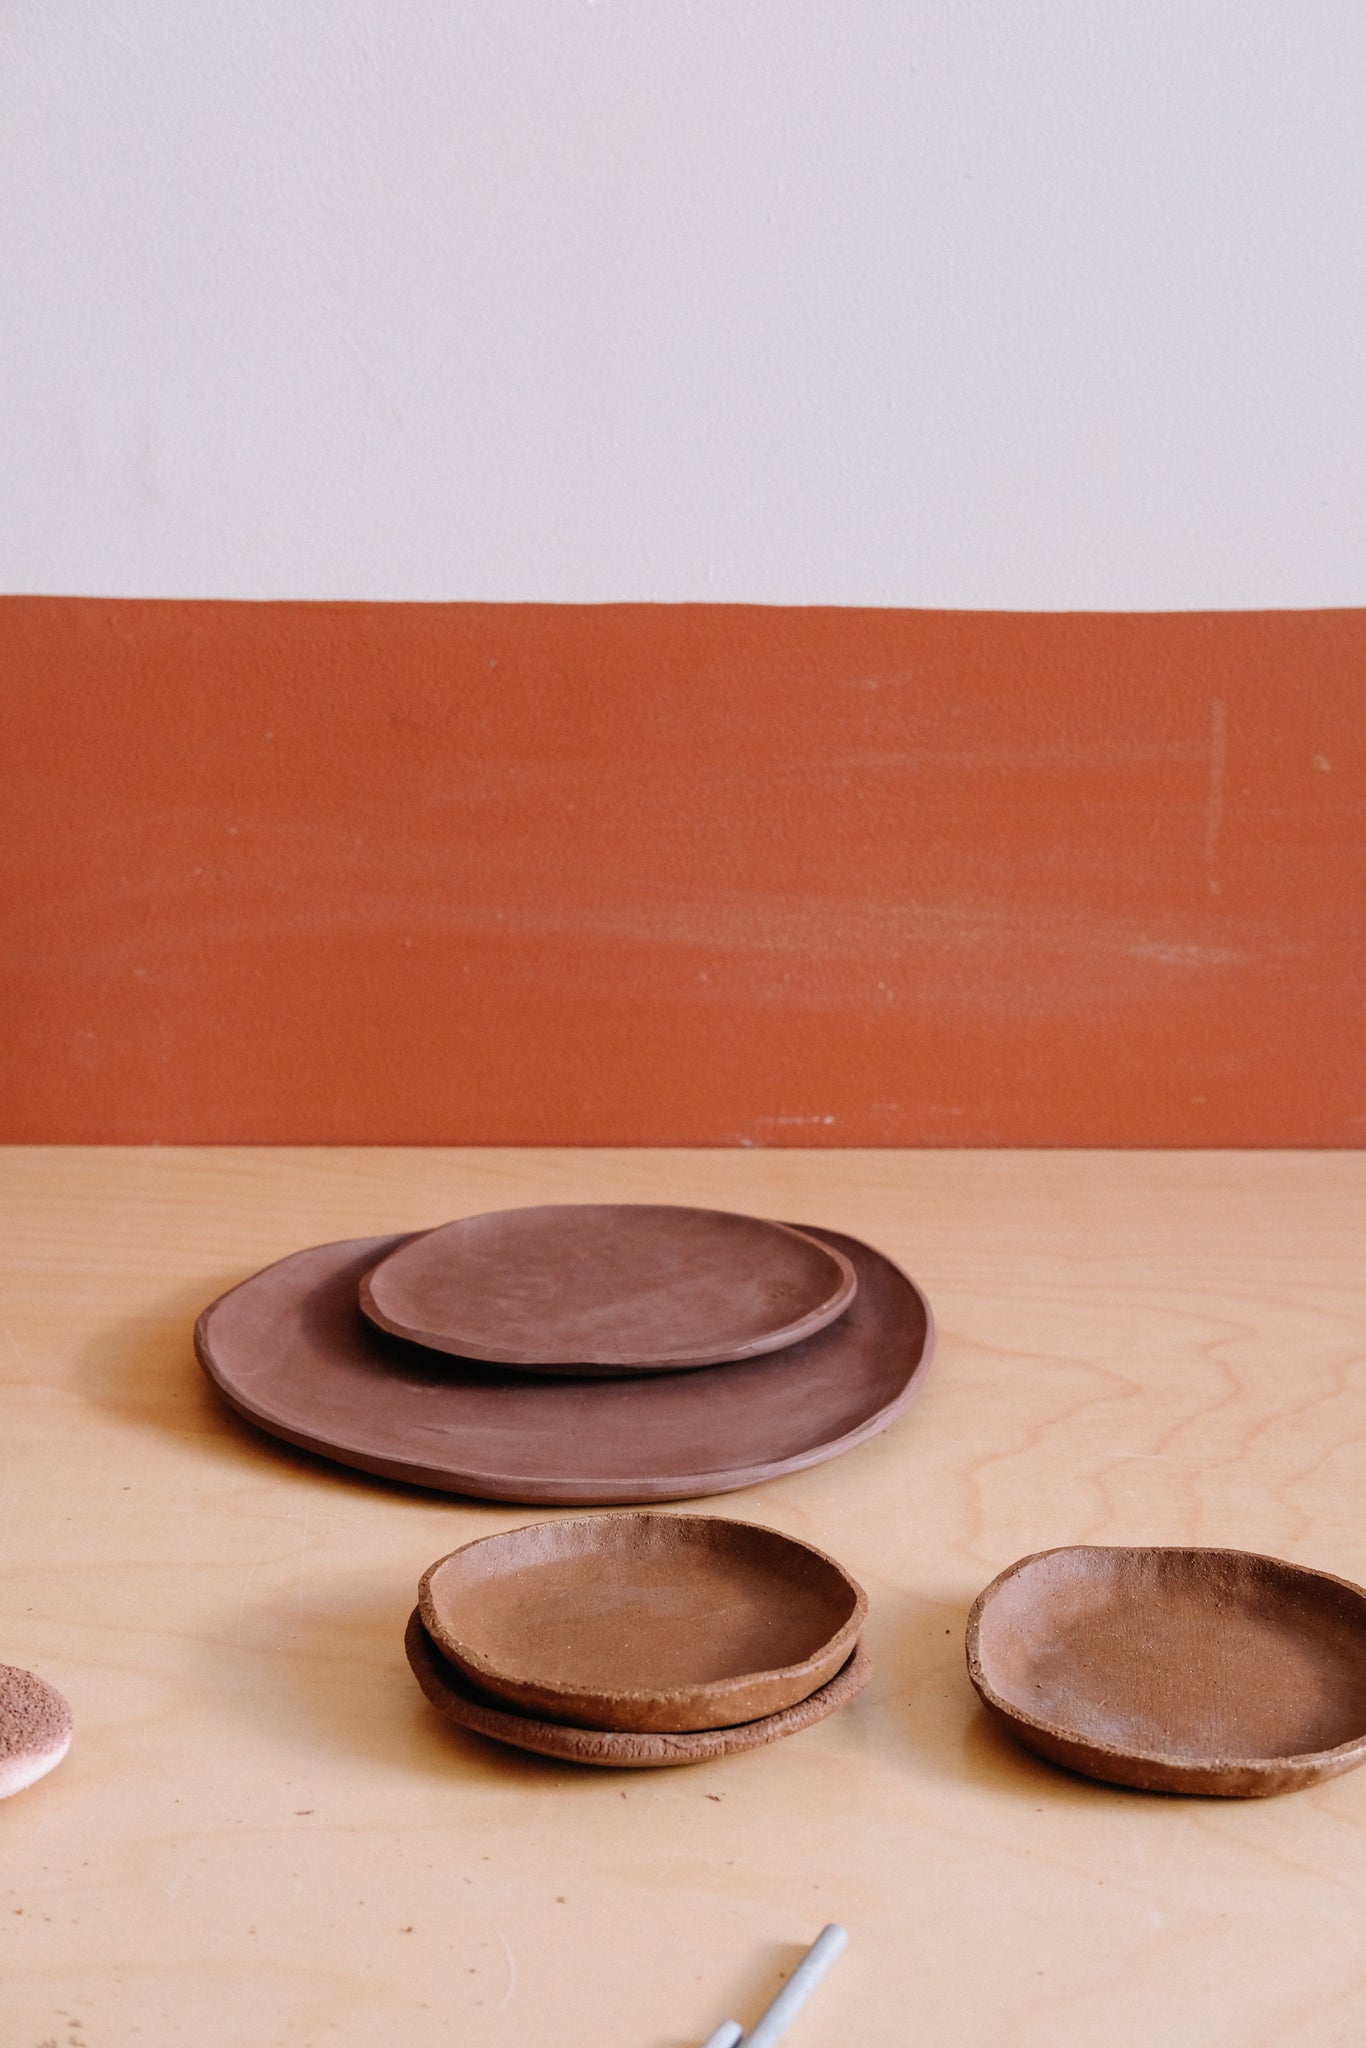 Meeting and interview with ceramist Lola Moreau on Brutal Ceramics